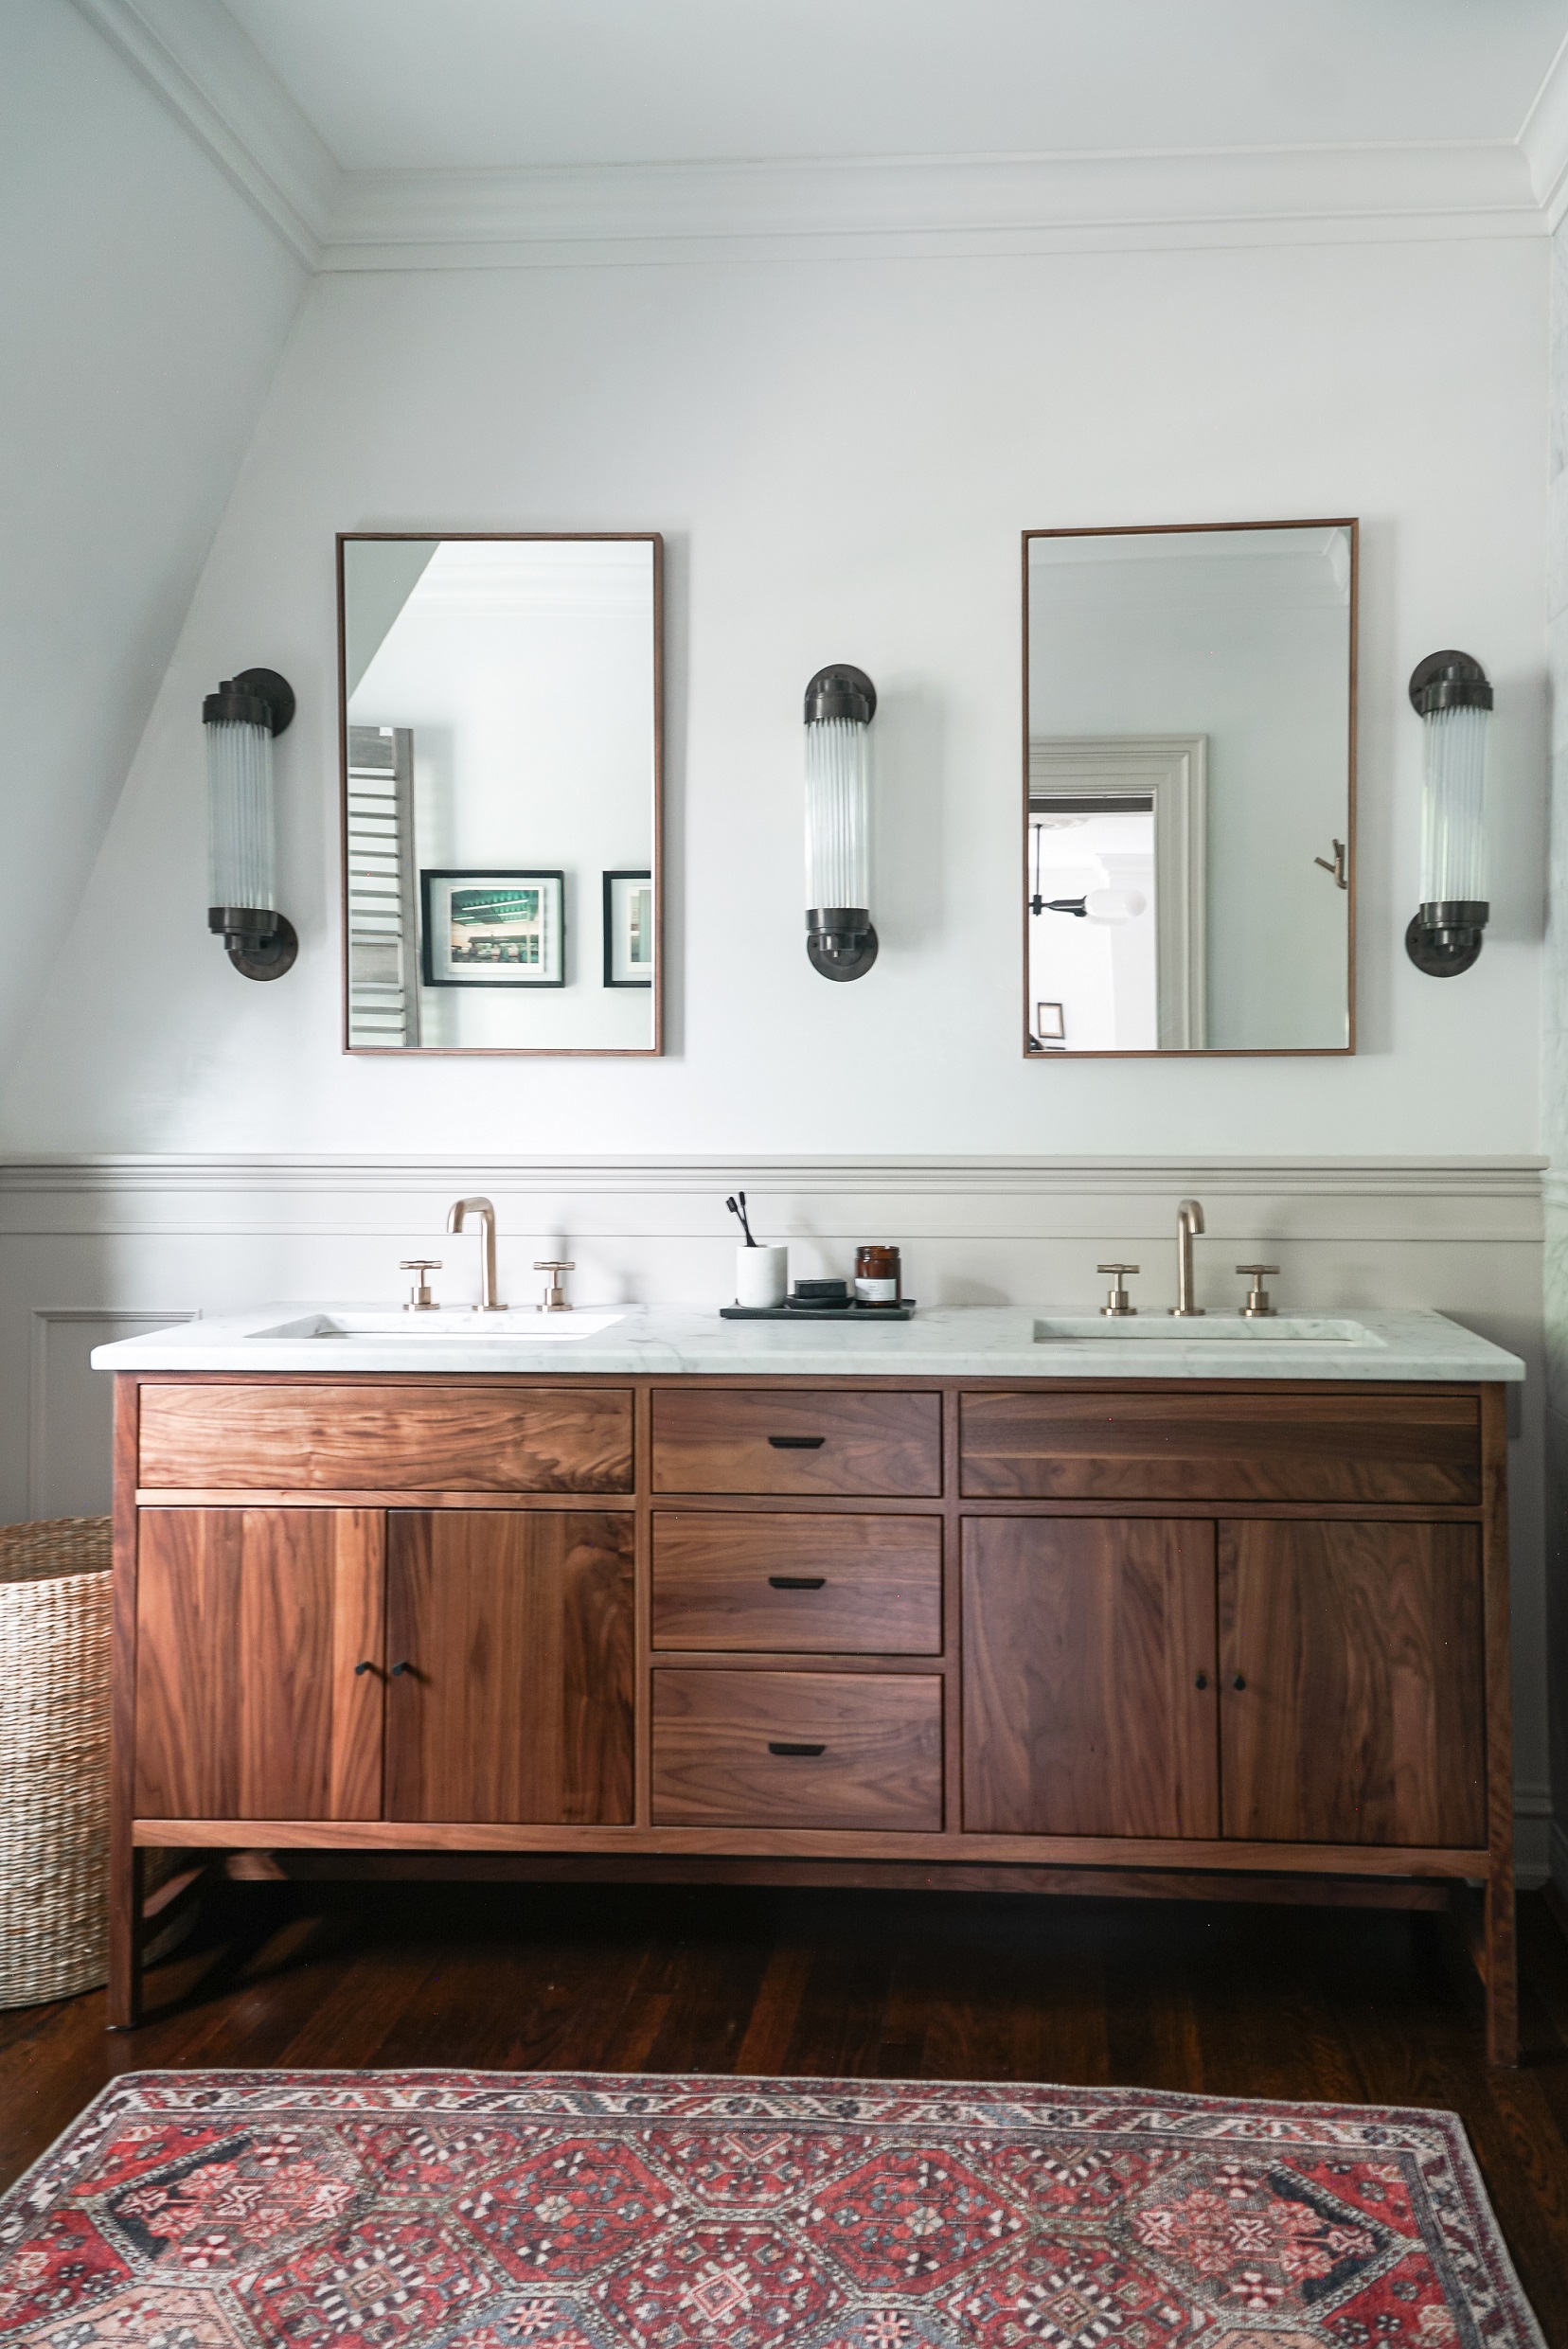 18 bathroom lighting ideas to brighten your space beautifully ...